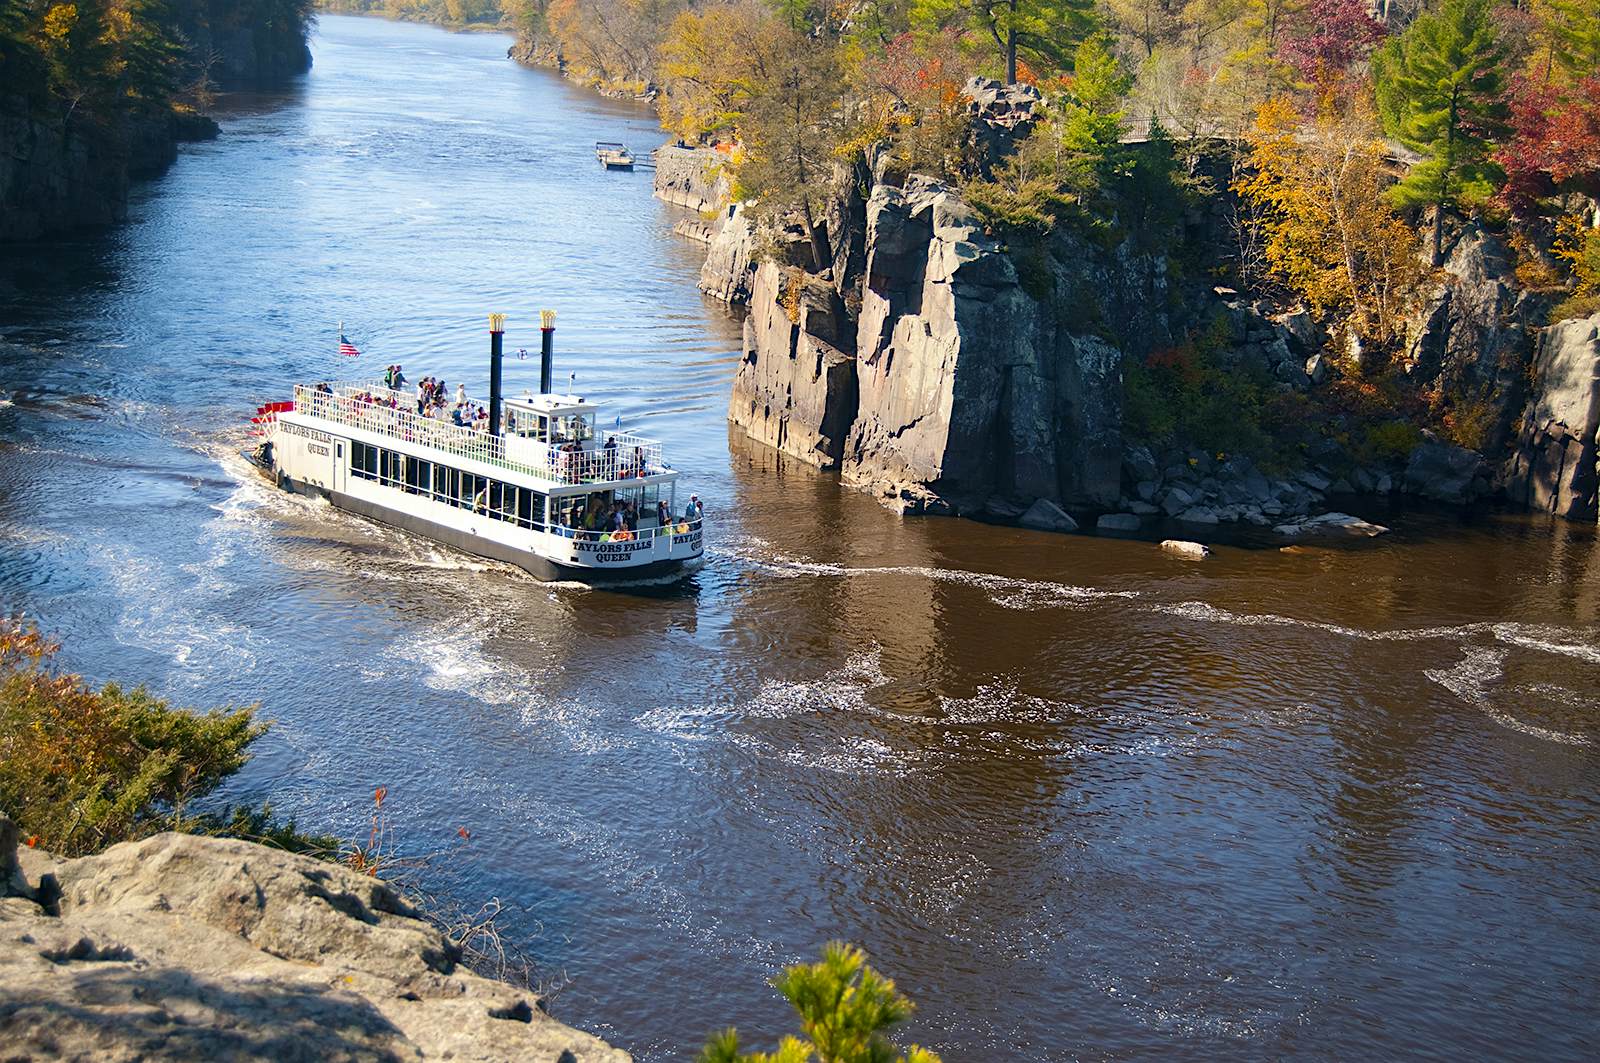 A paddle boat on the St. Croix River. Trees on the rocky riverbanks have leaves of red, orange, gold and green